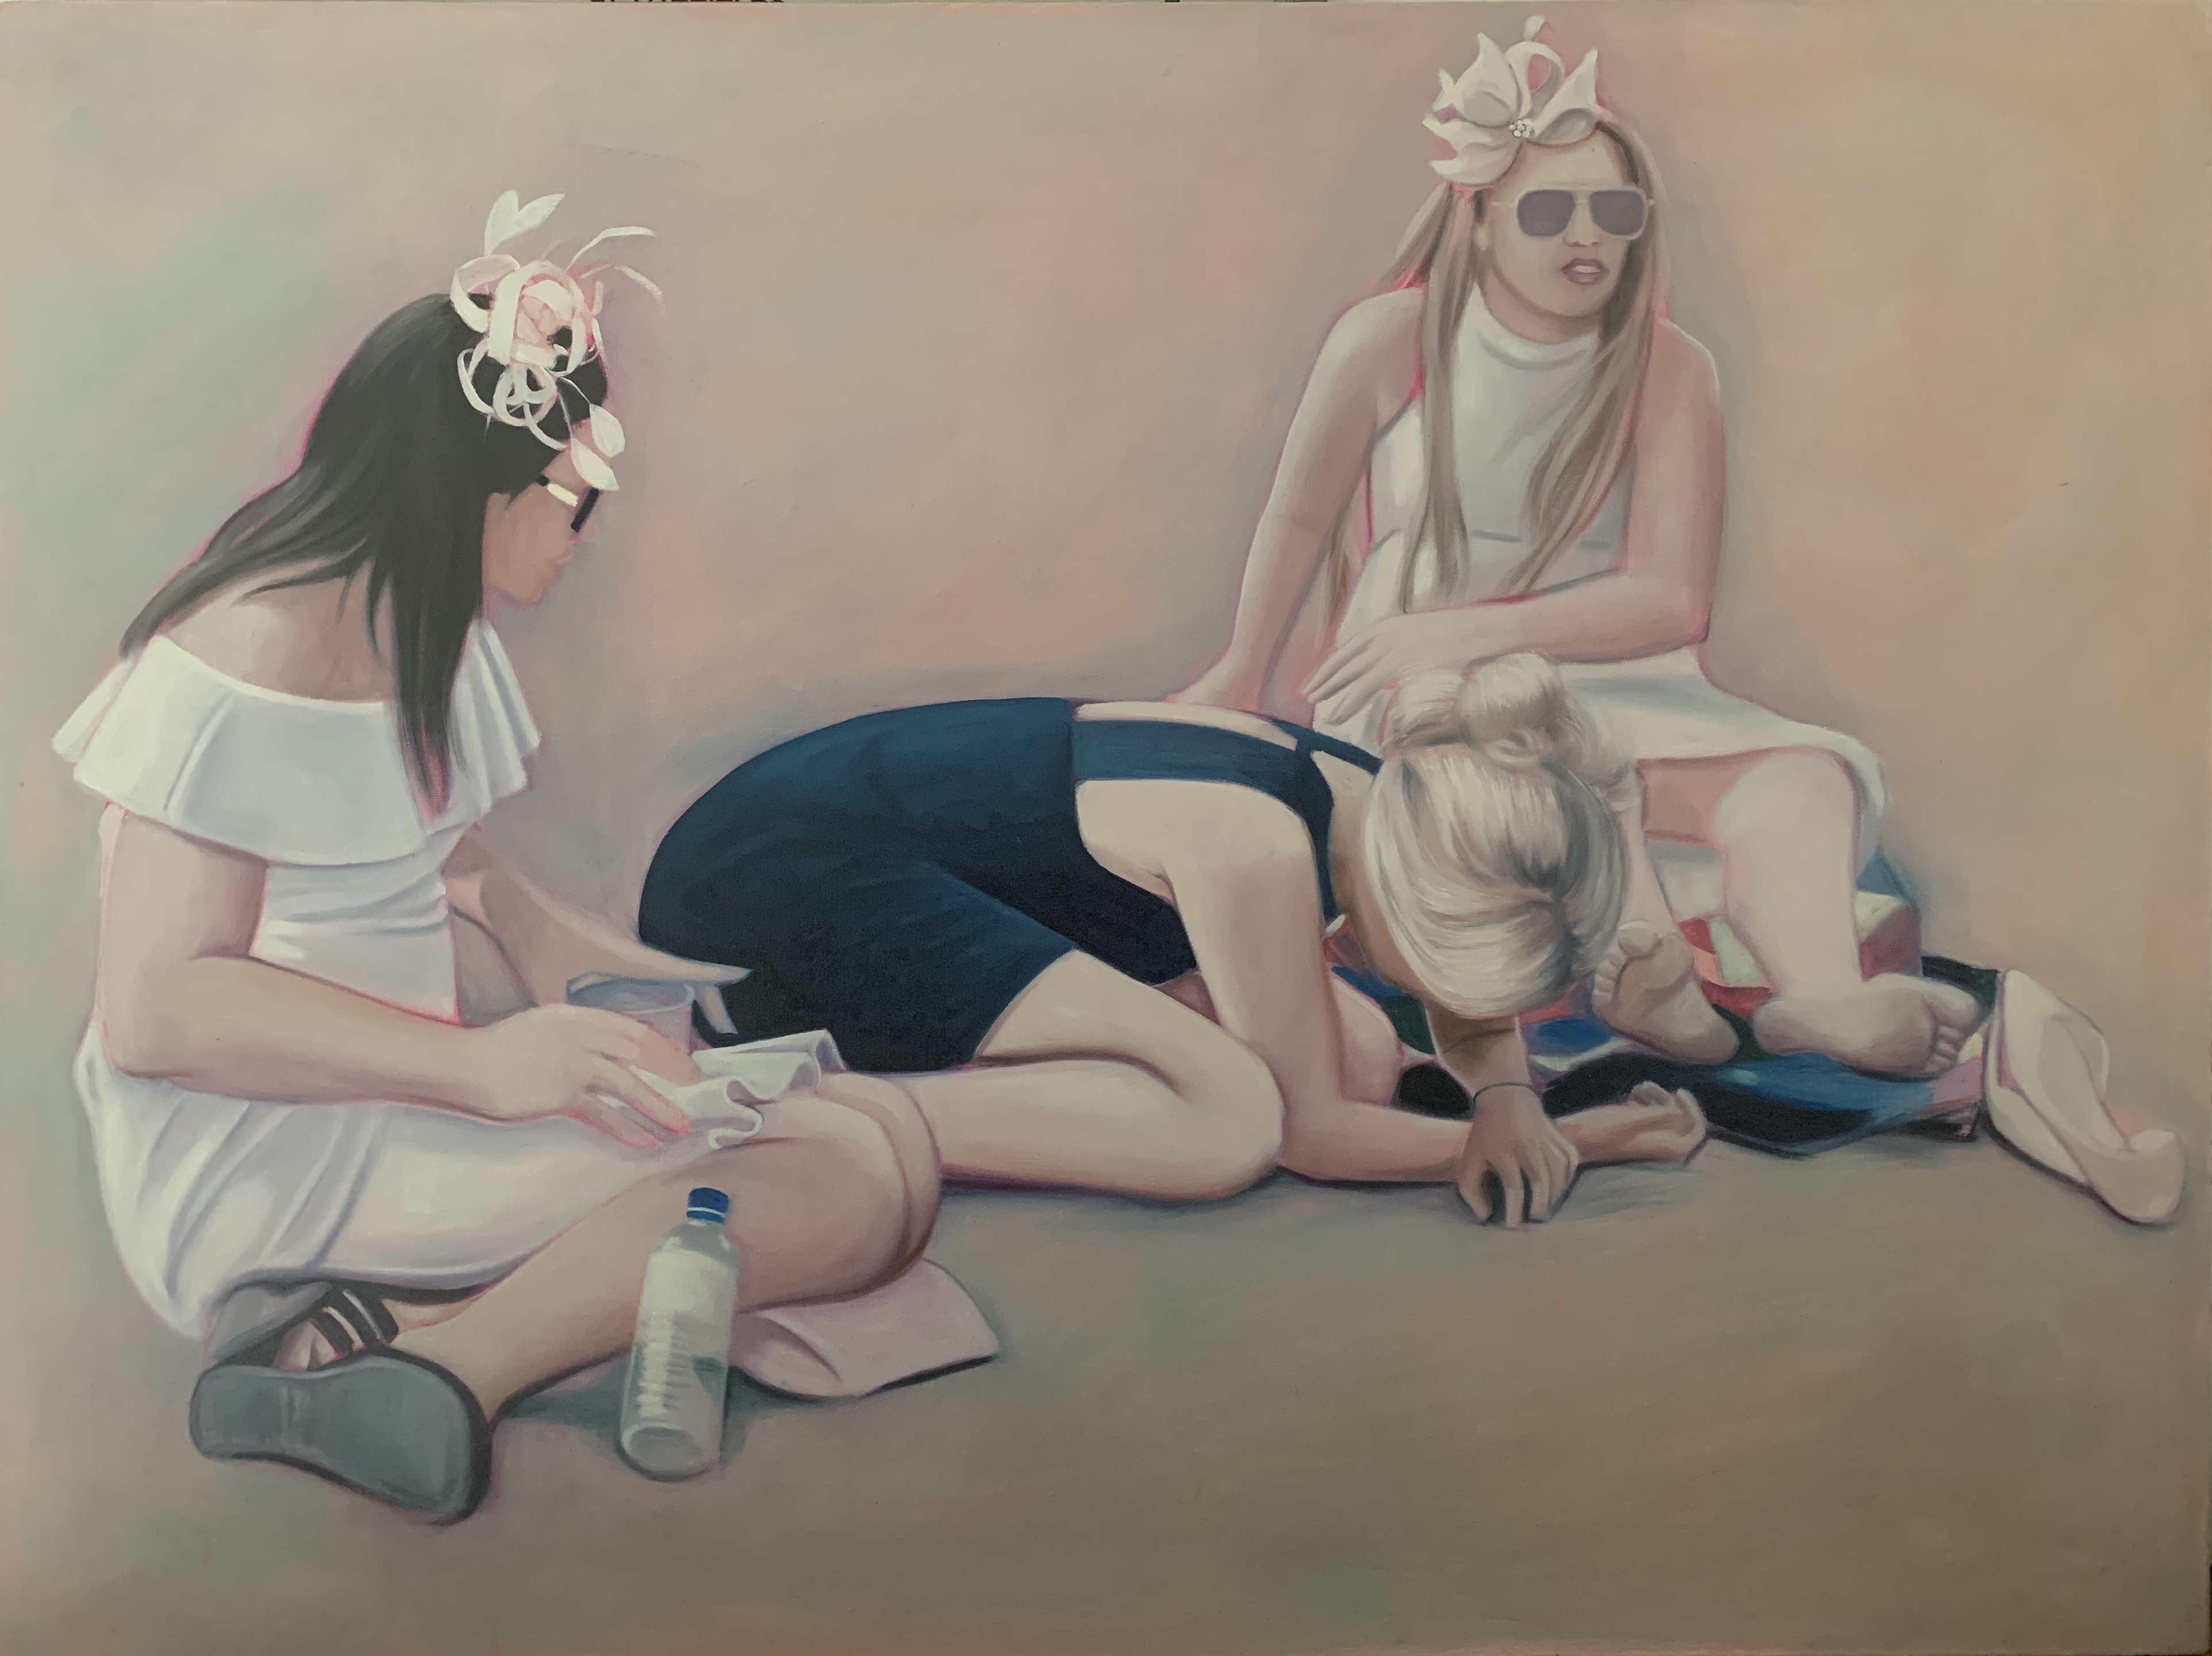 Lydia Blakeley.<em> Blossom Hill</em>, 2019. Oil on Linen, 29 7/8 x 40 1/8 inches (76 x 102 cm)